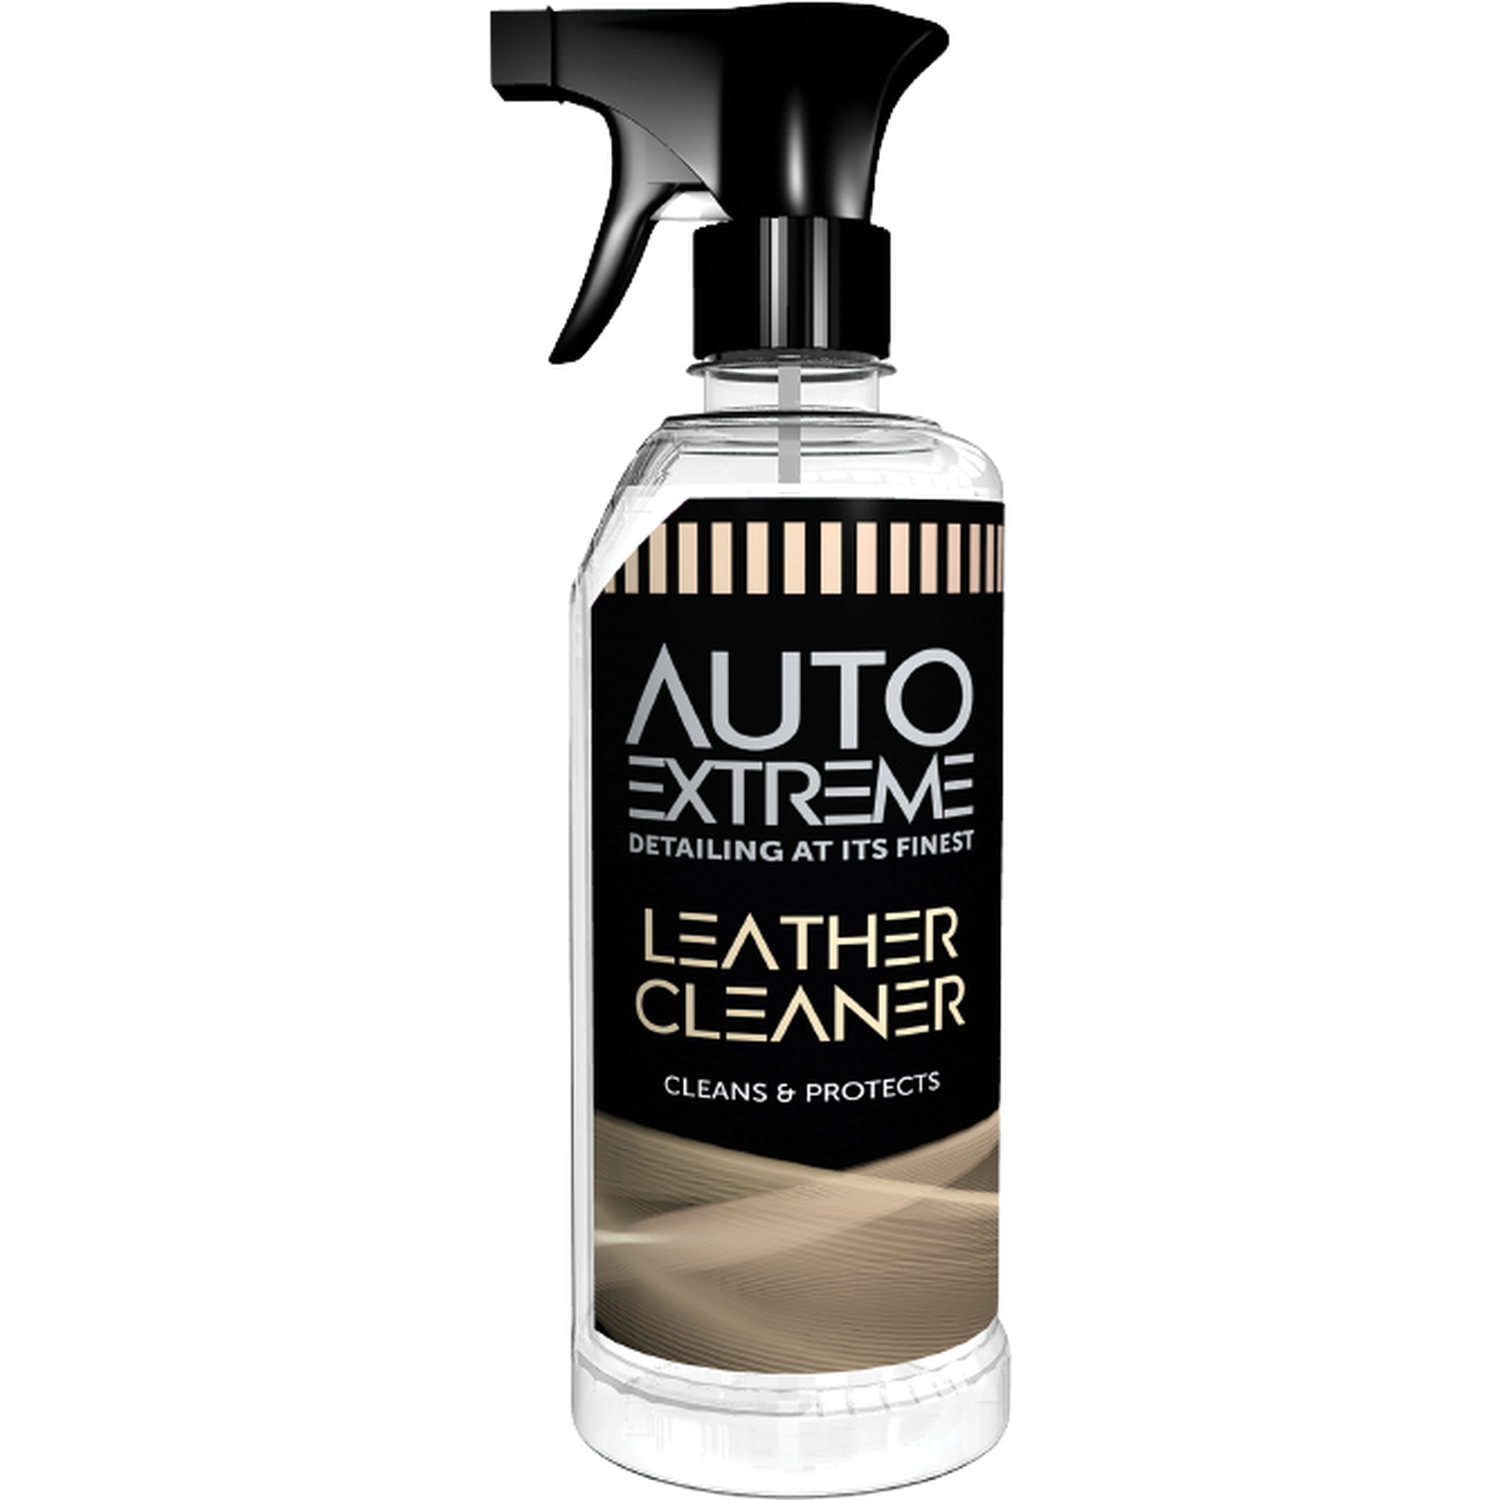 Auto Extreme Leather Cleaner Image